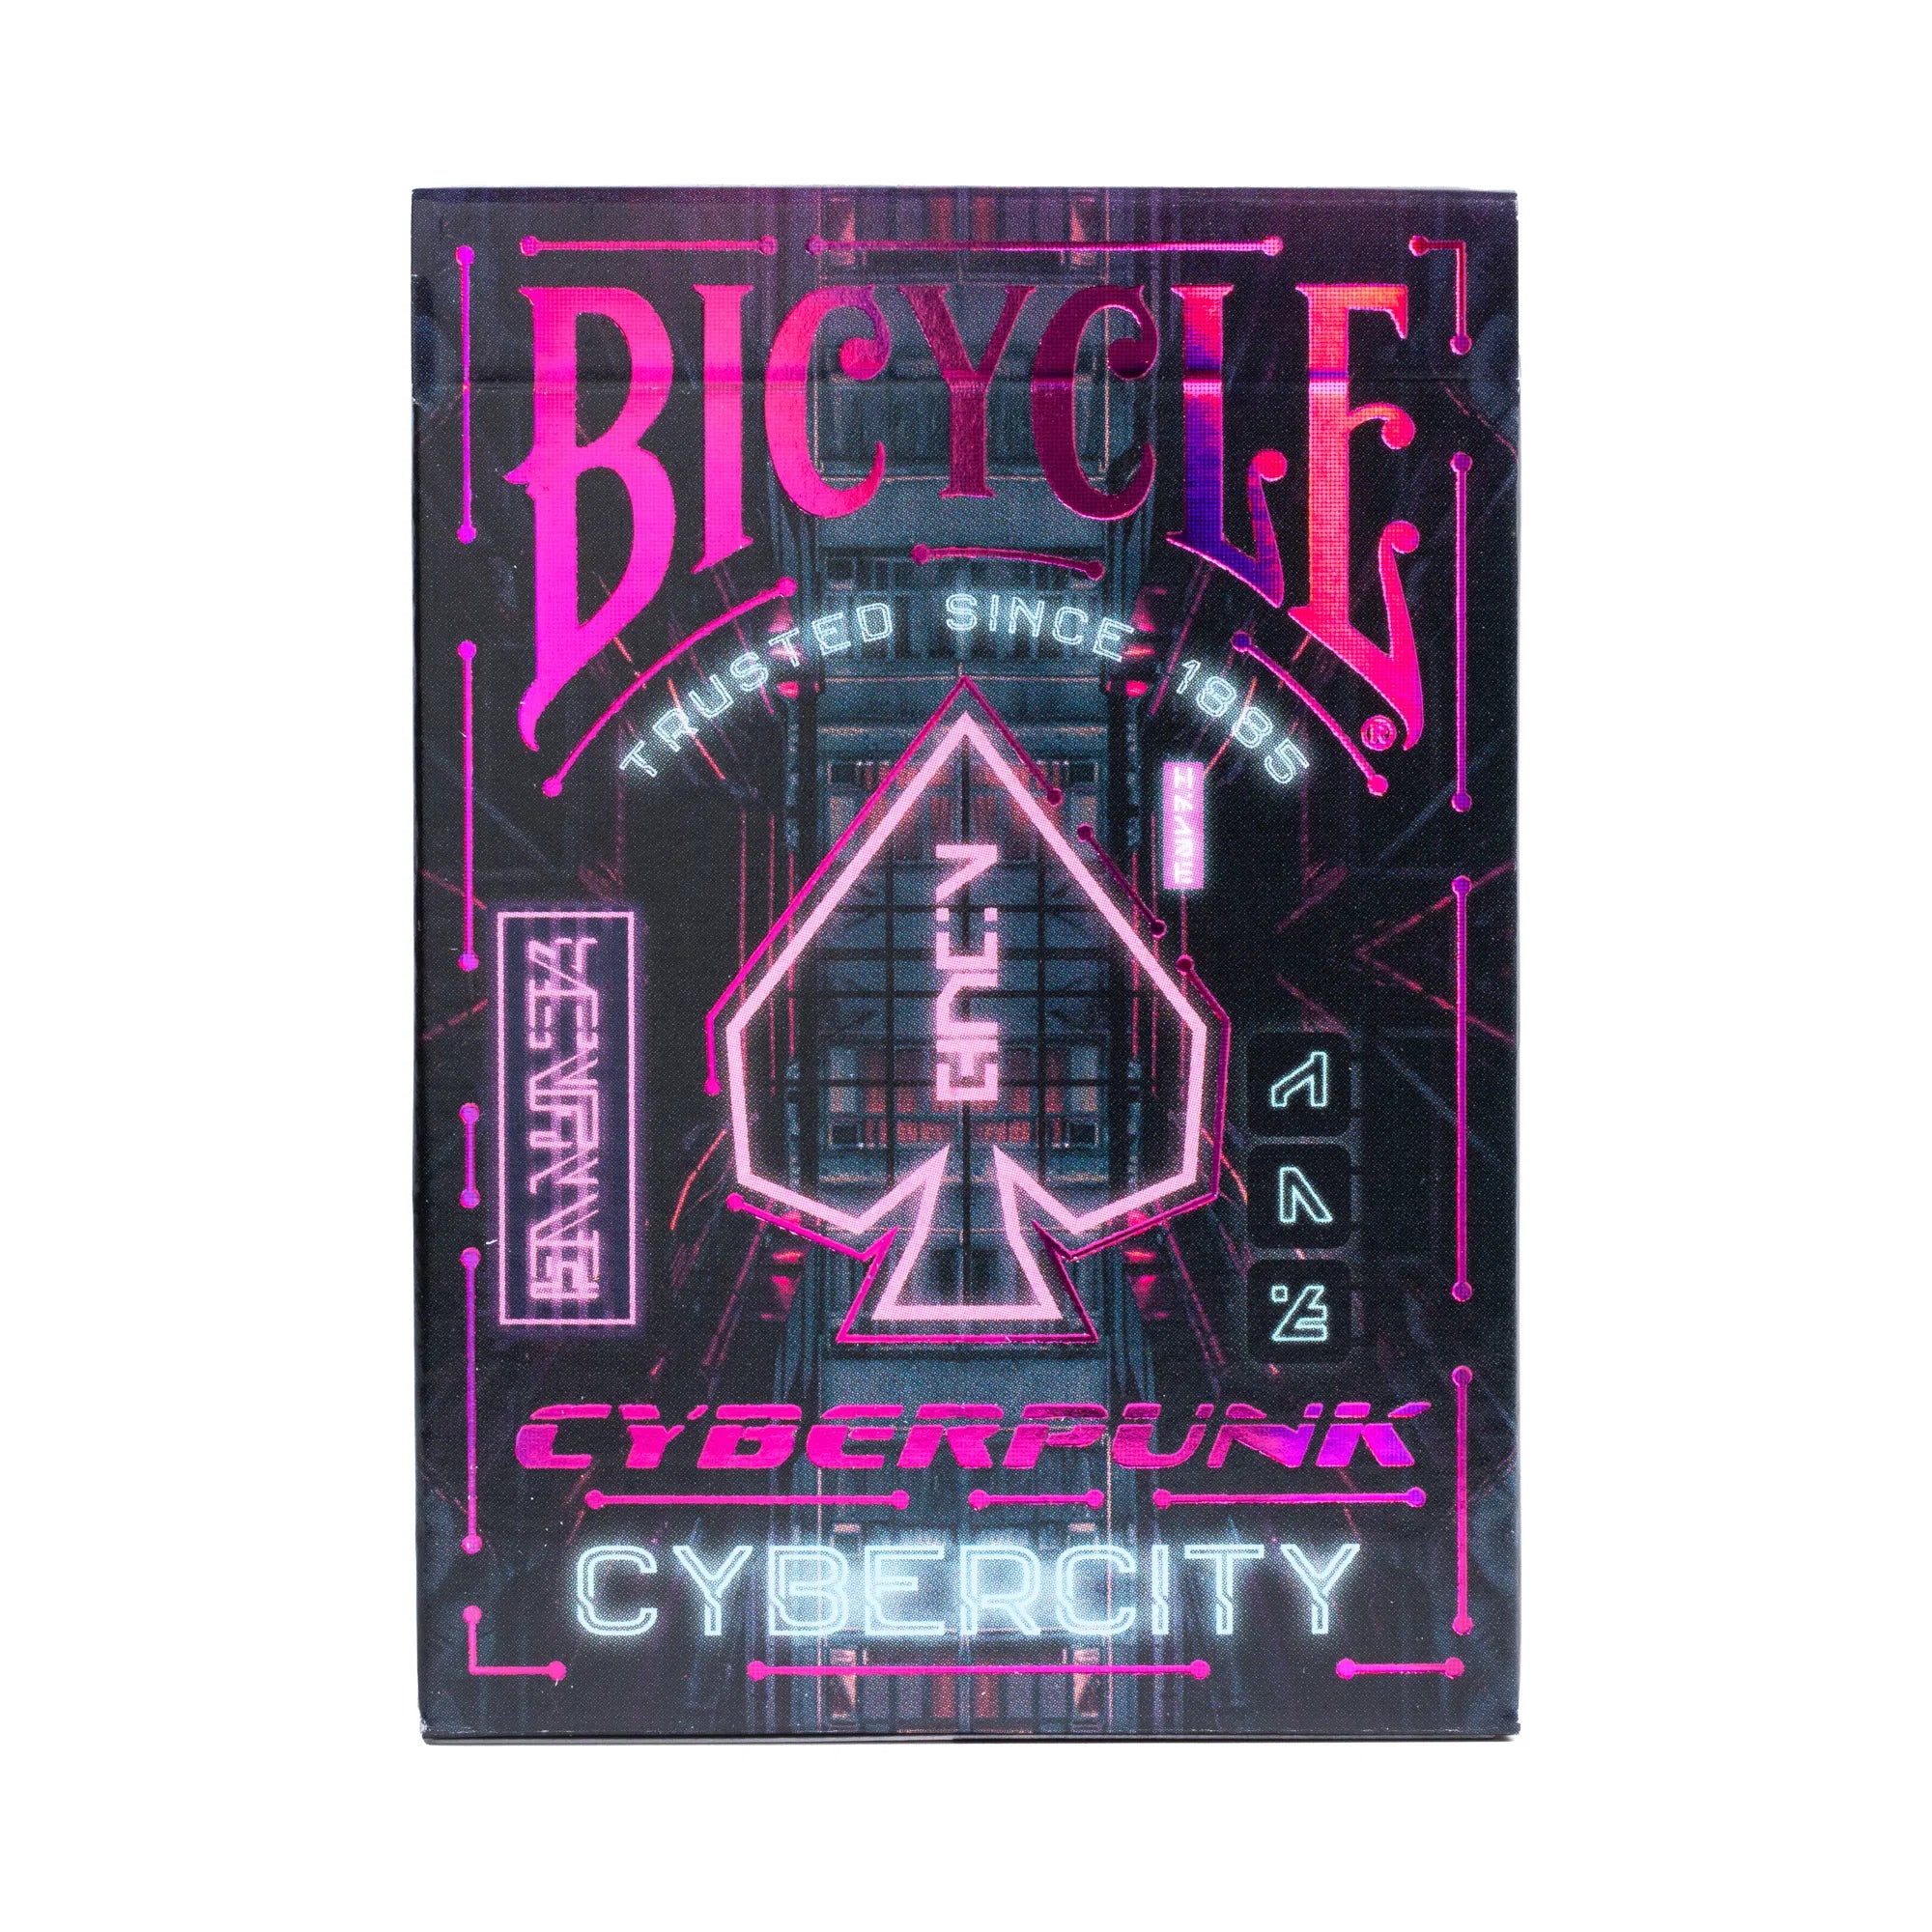 Bicycle Cyberpunk Cyber City Playing Card Deck